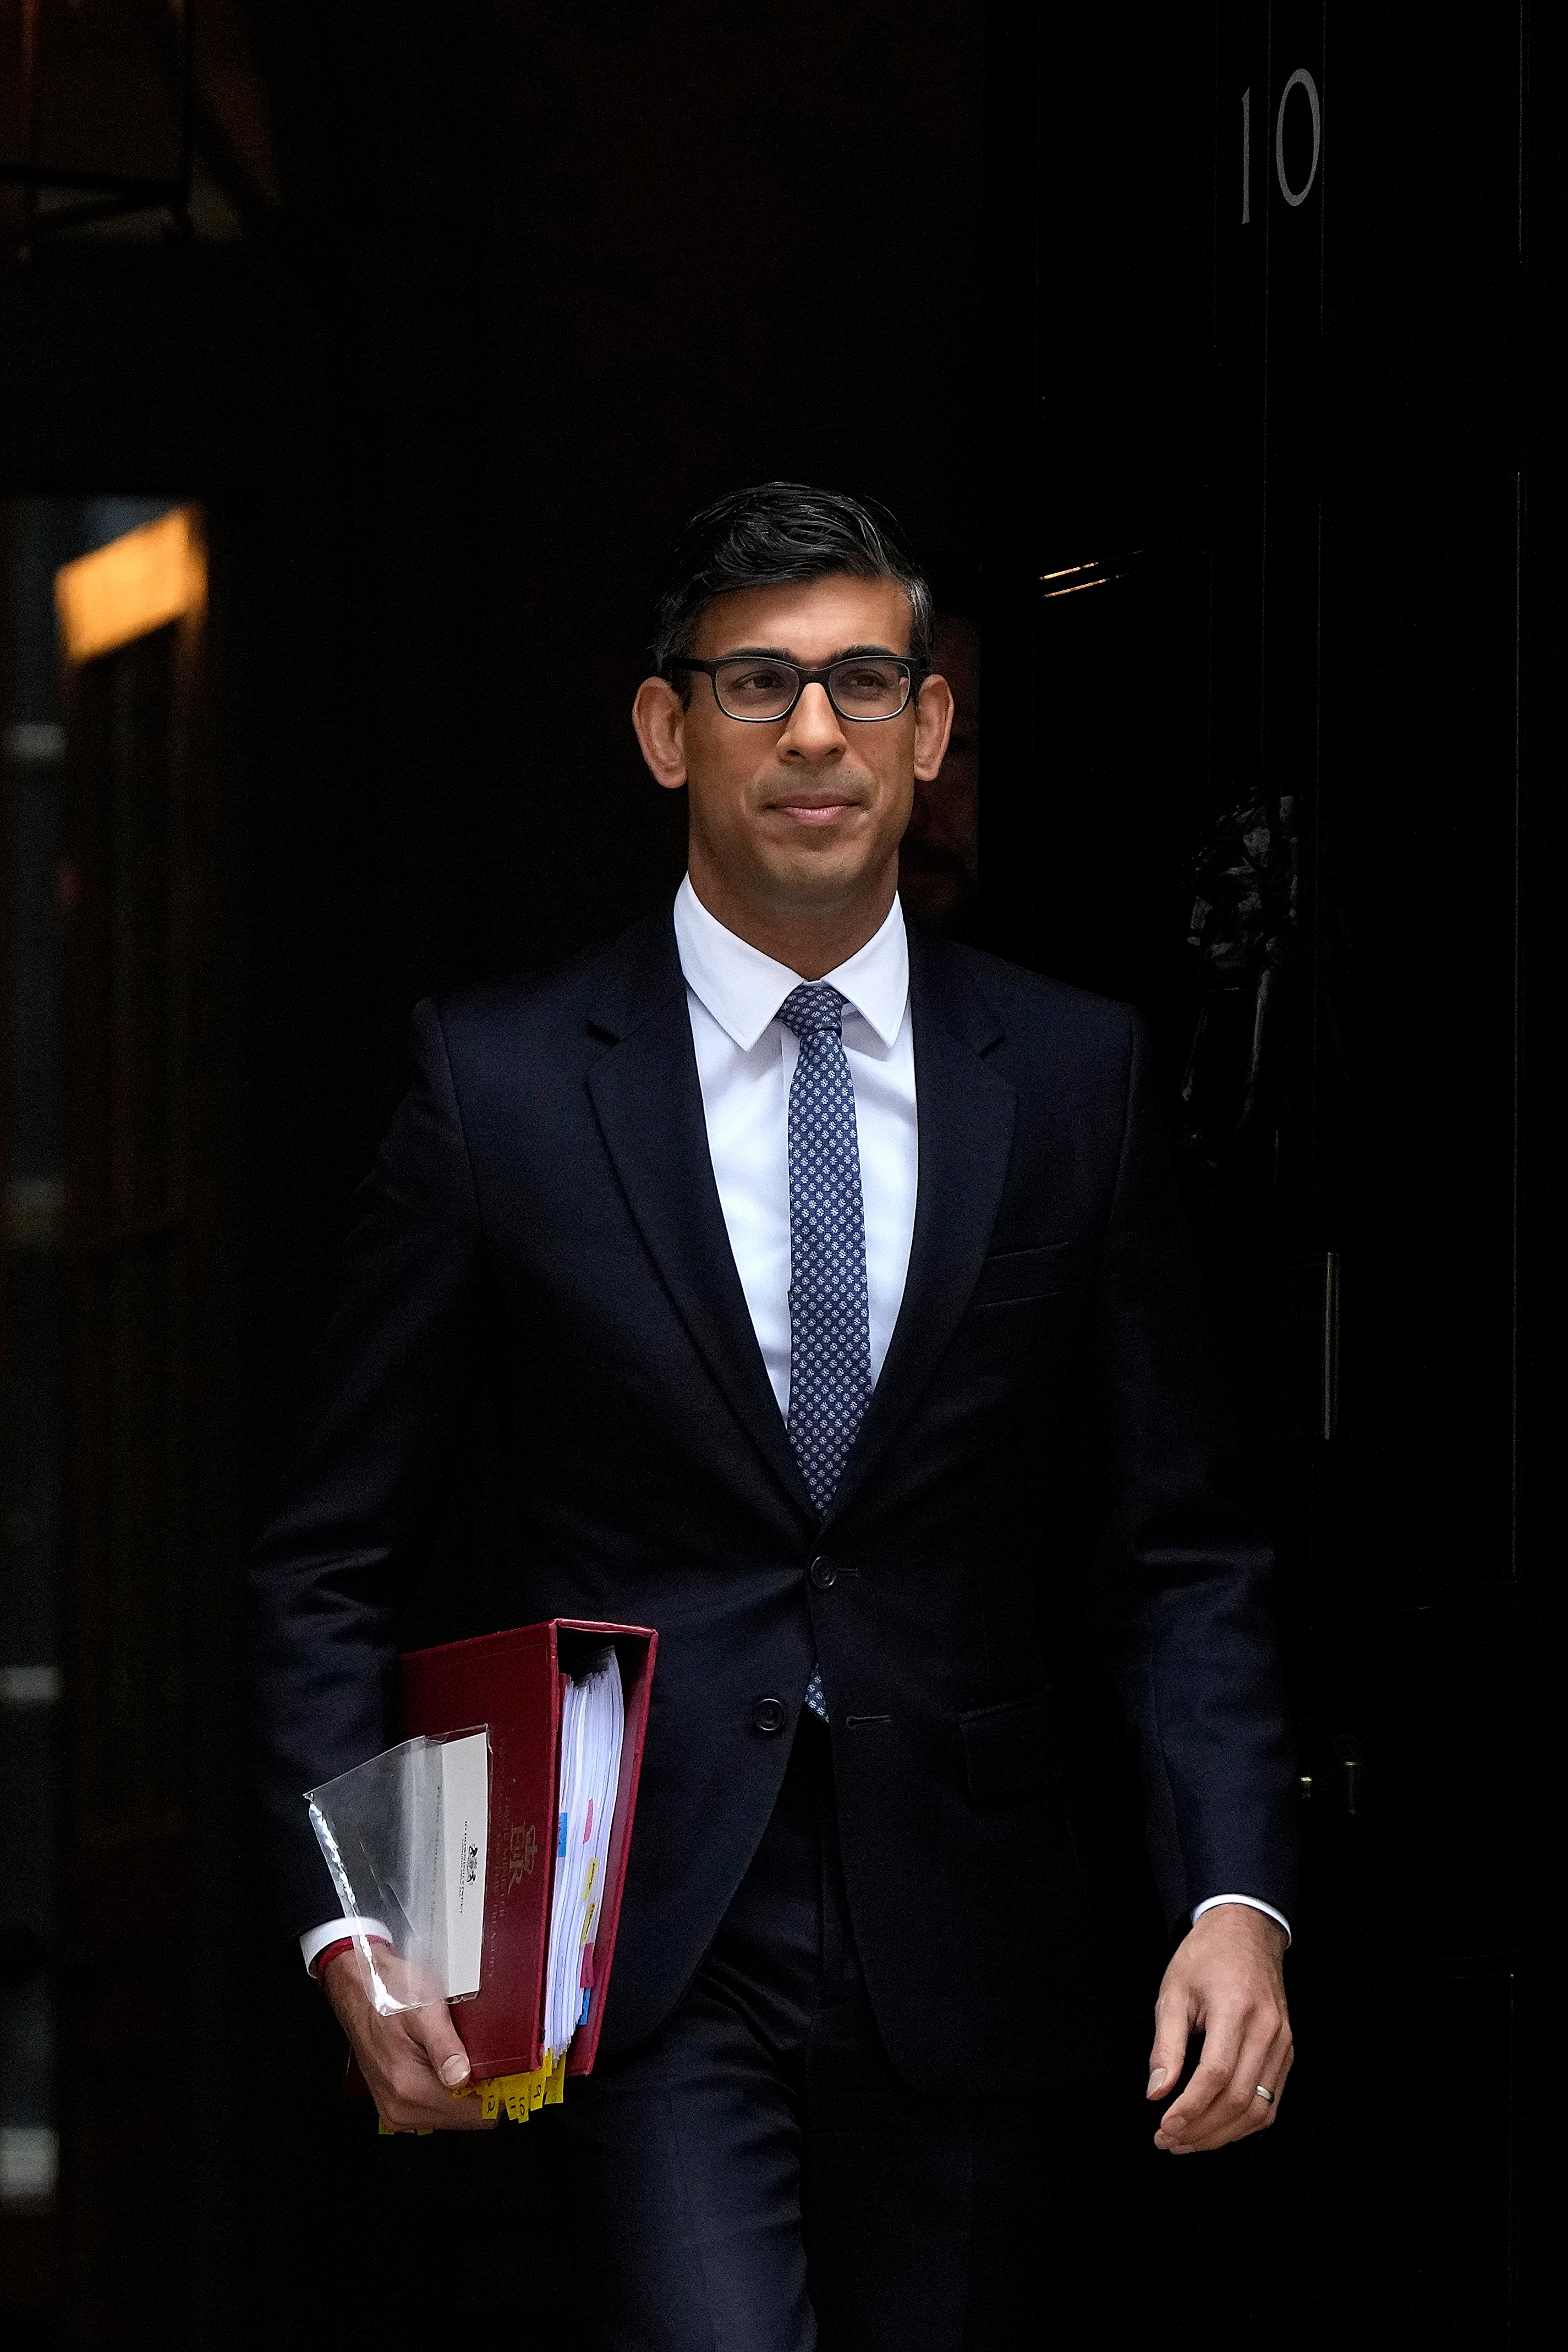 Everybody thinks Labour will romp to an election win, but the Budget showed why Rishi Sunak can cause a major upset